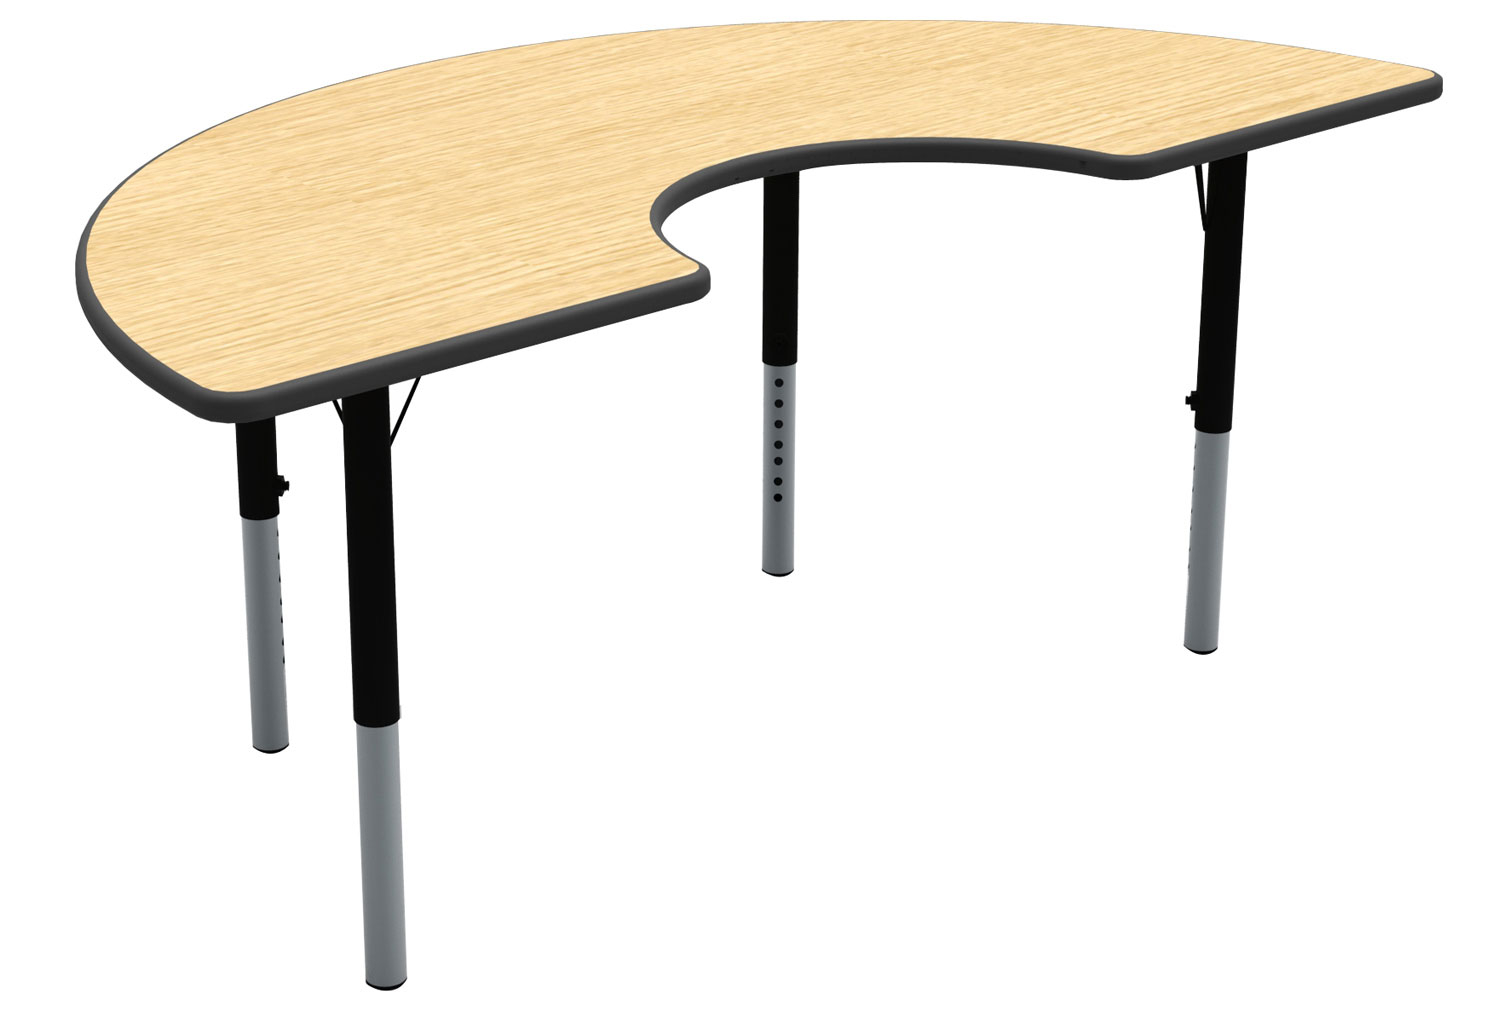 Early Years Arc Shaped Height Adjustable Classroom Table, Blue Top/ Black Edge